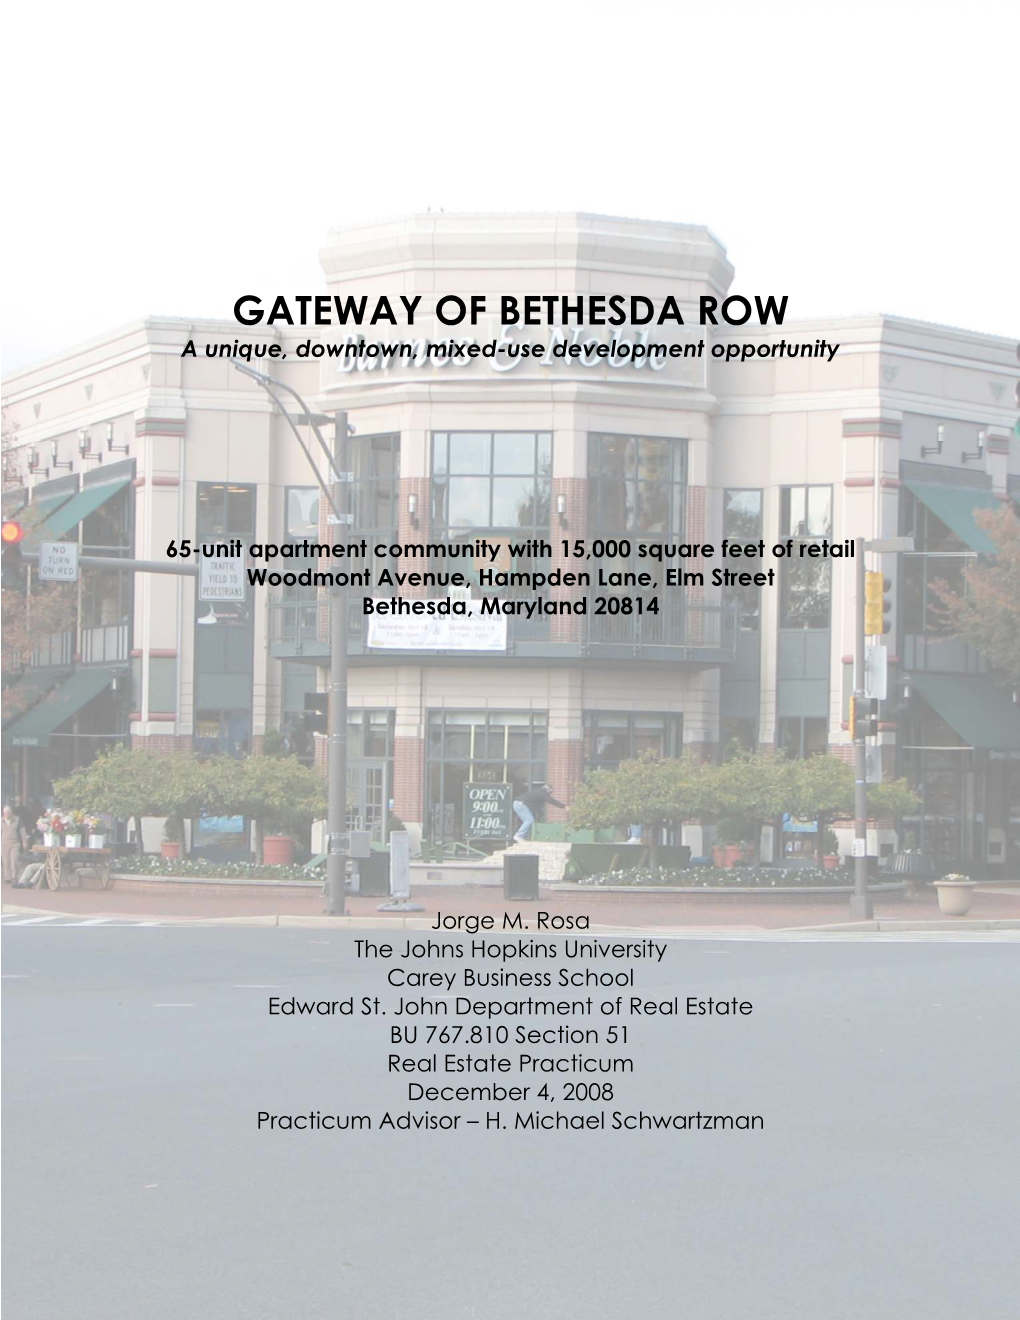 GATEWAY of BETHESDA ROW a Unique, Downtown, Mixed-Use Development Opportunity